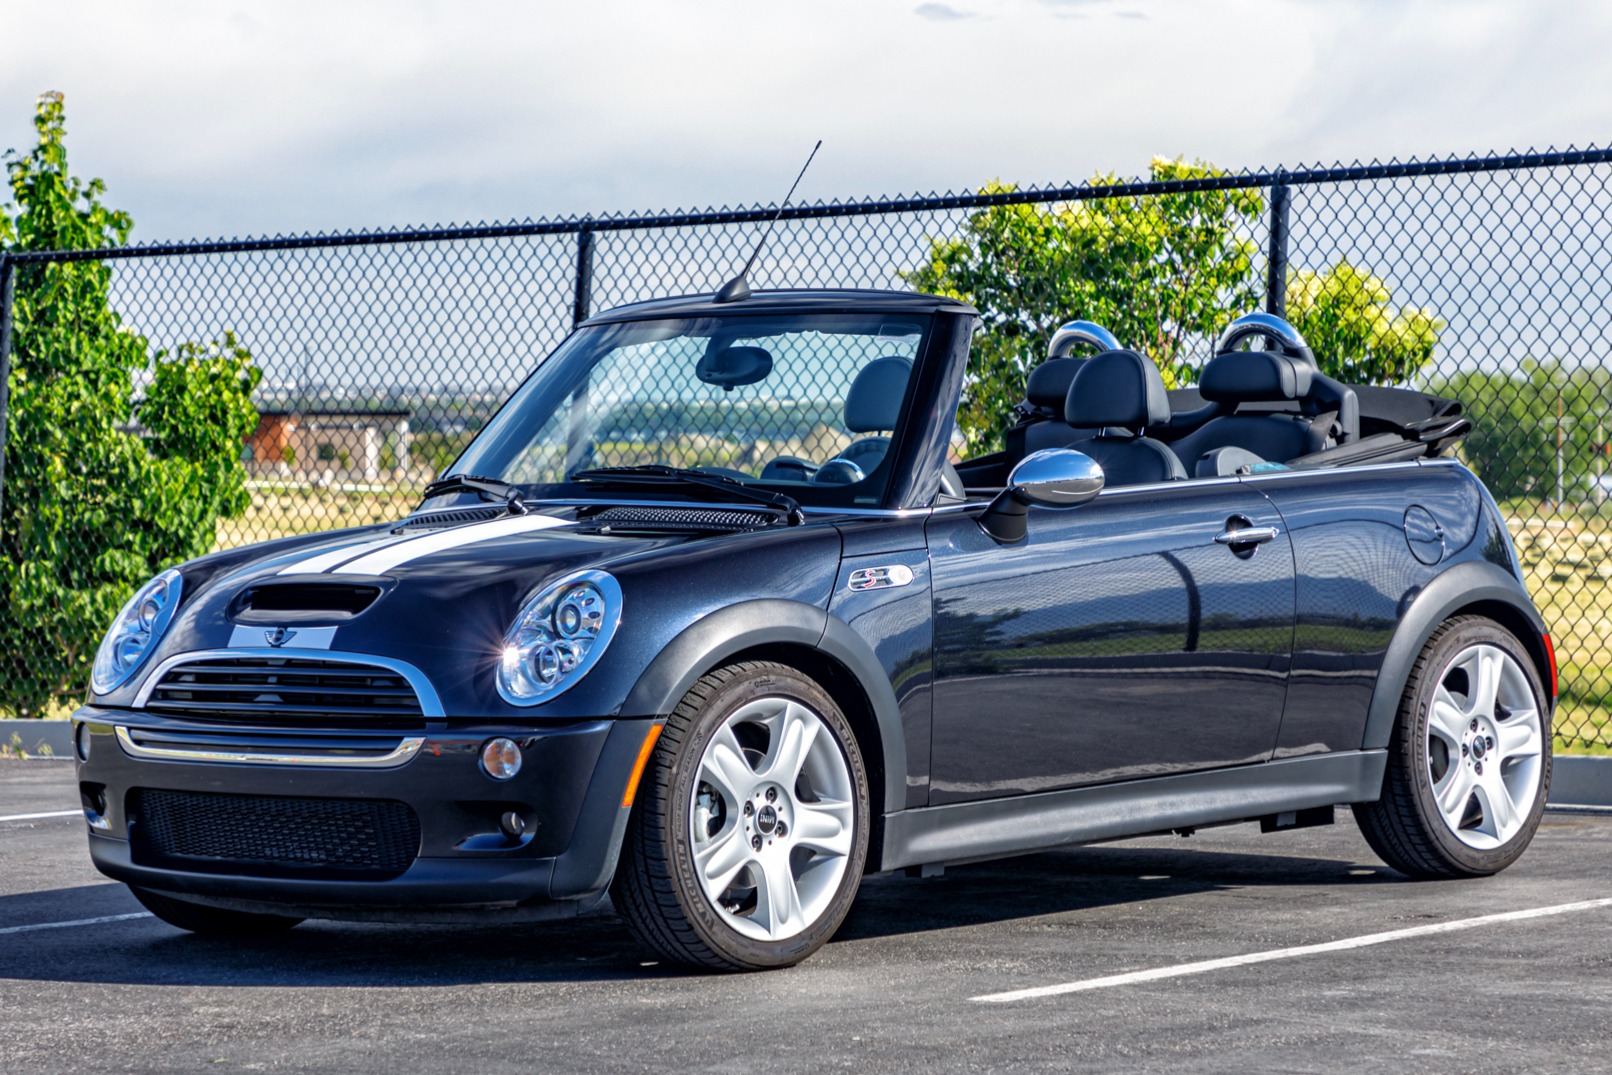 Used 15k-Mile 2008 Mini Cooper S Convertible Review